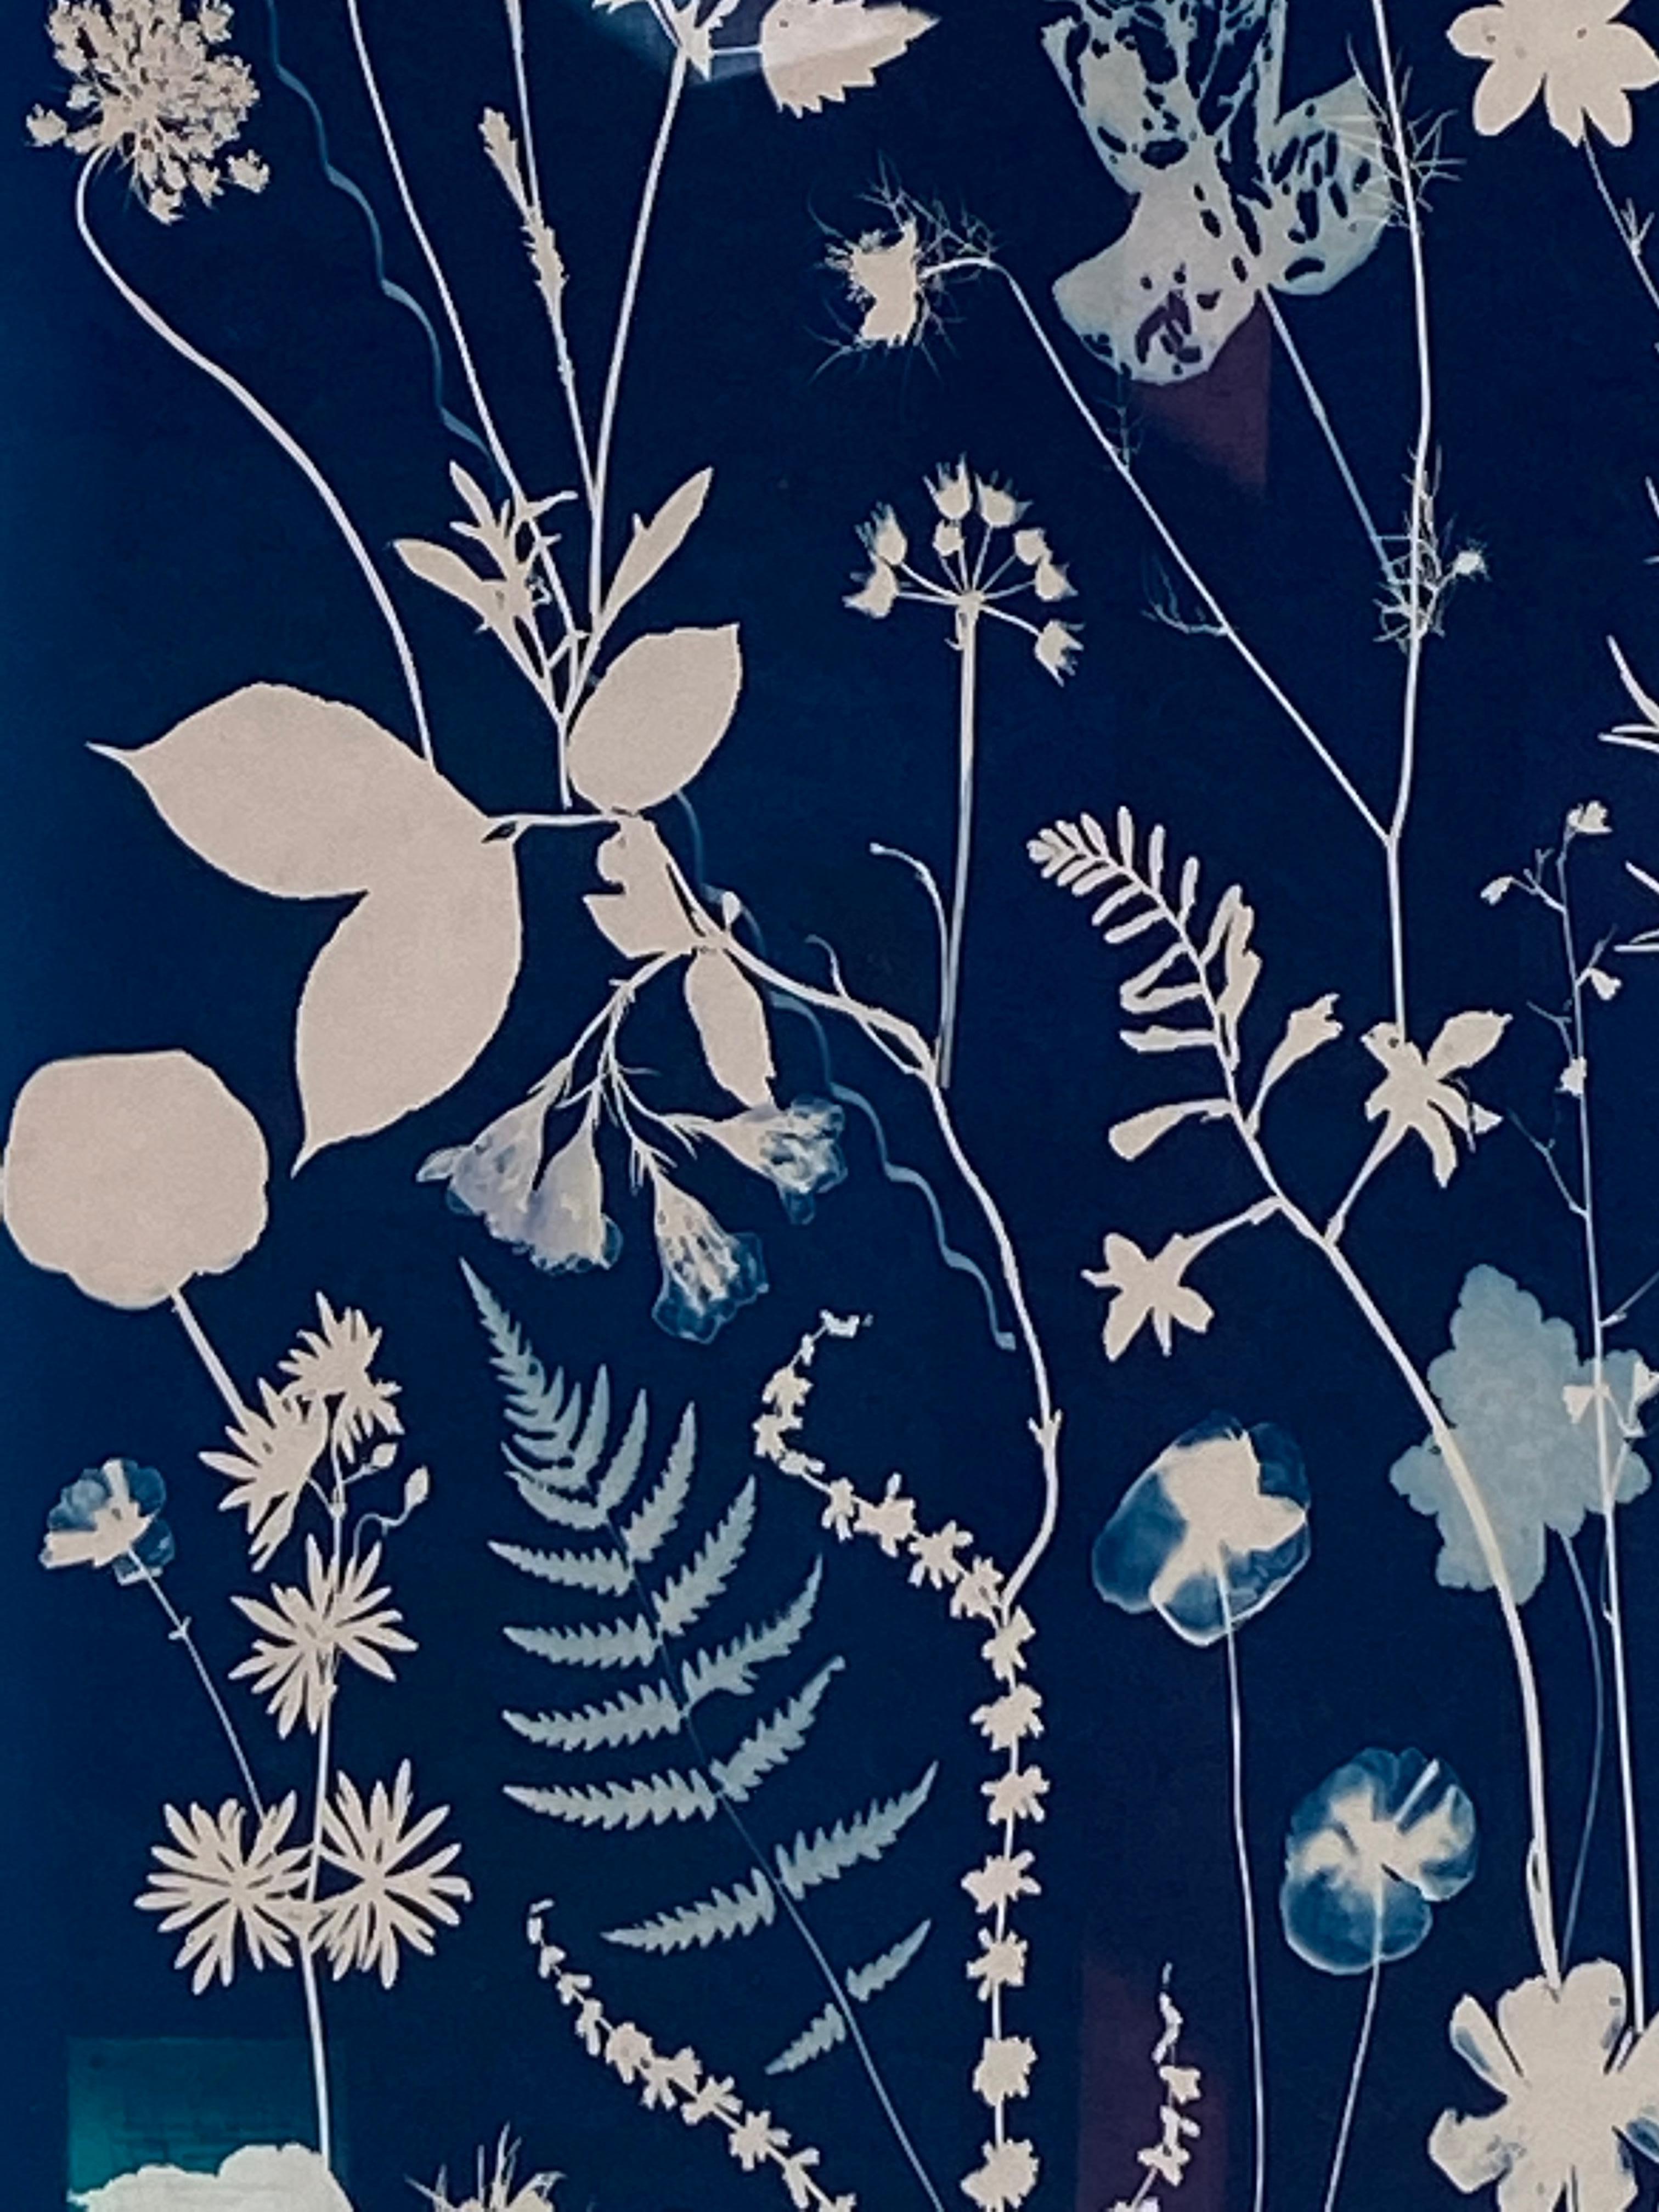 In this vertical work in watercolor, gouache, and cyanotype on hot press watercolor paper, meticulously detailed flowers, including poppies, cosmos, rose of sharon and Queen Anne's lace are depicted with ferns in shades of pale blue against a deep,